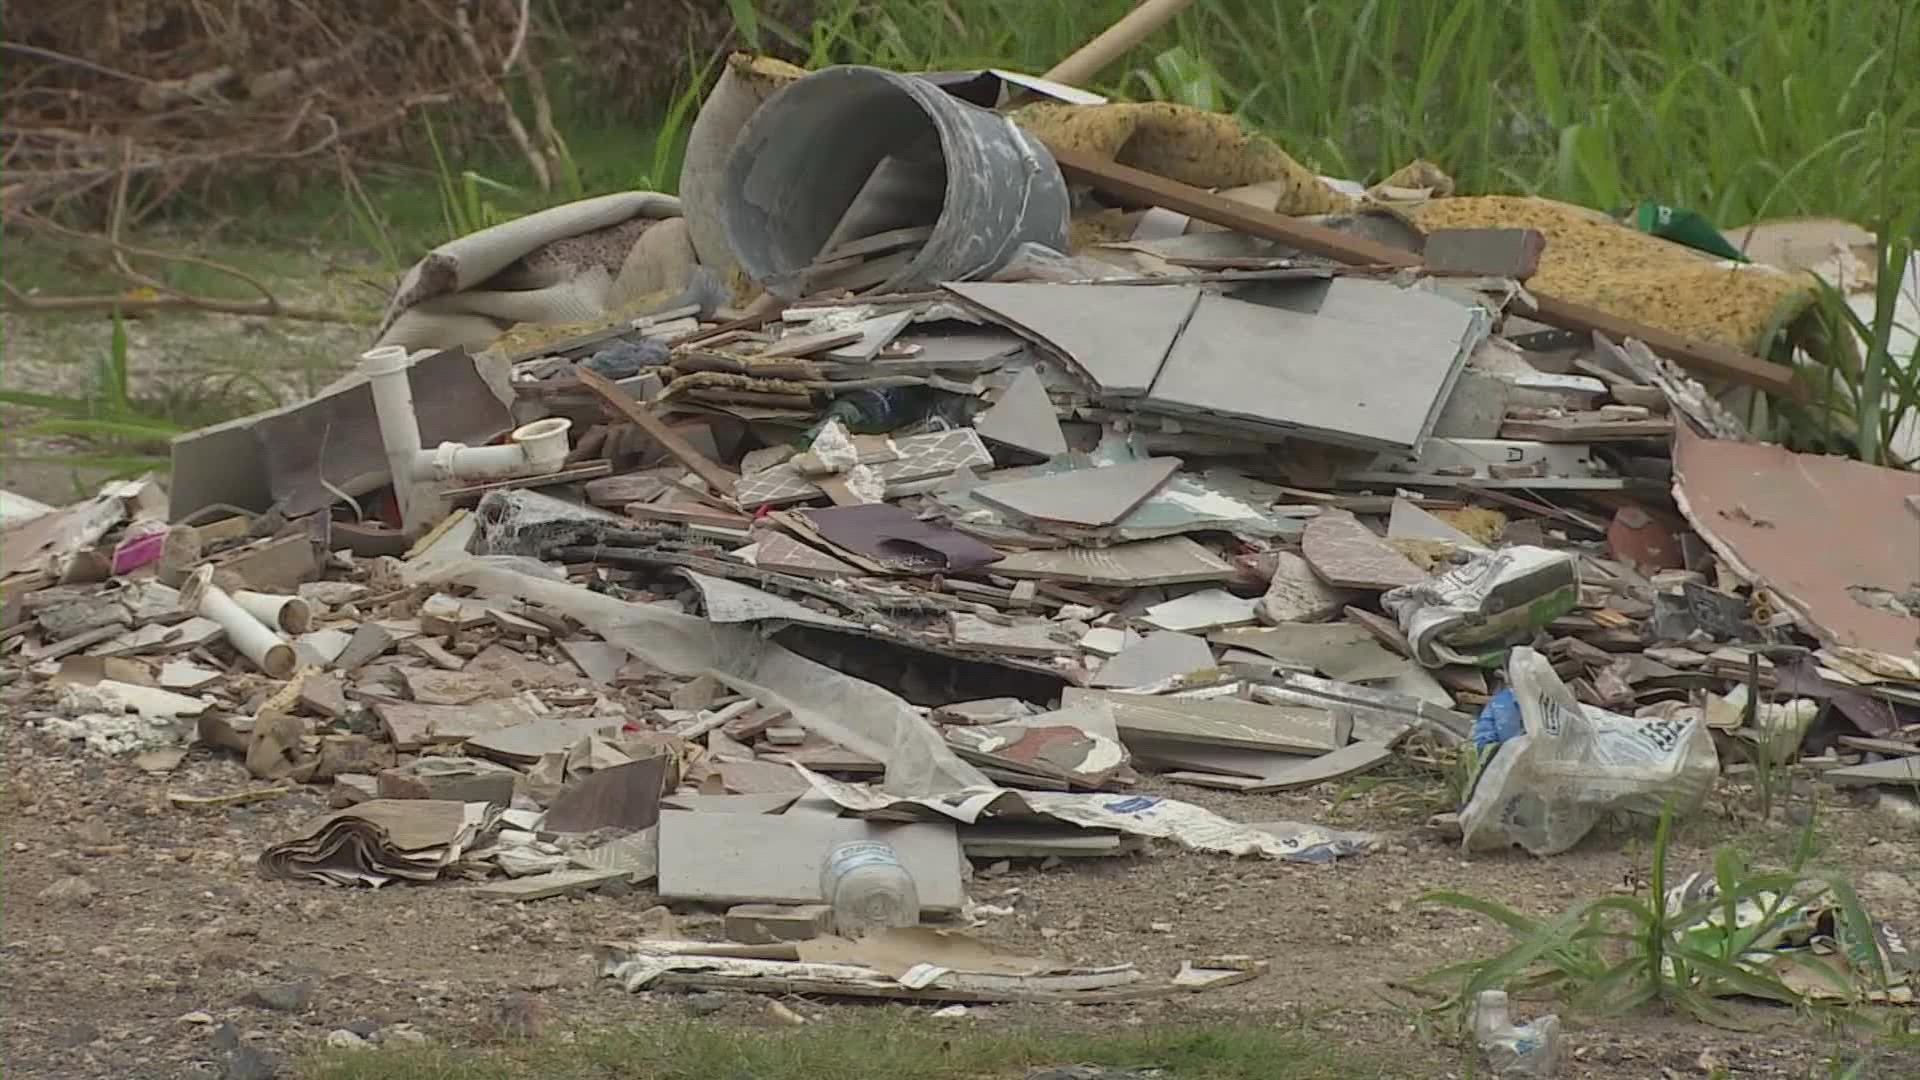 The Department of Justice has launched an investigation into the City of Houston for the way it handles illegal dumping complaints.